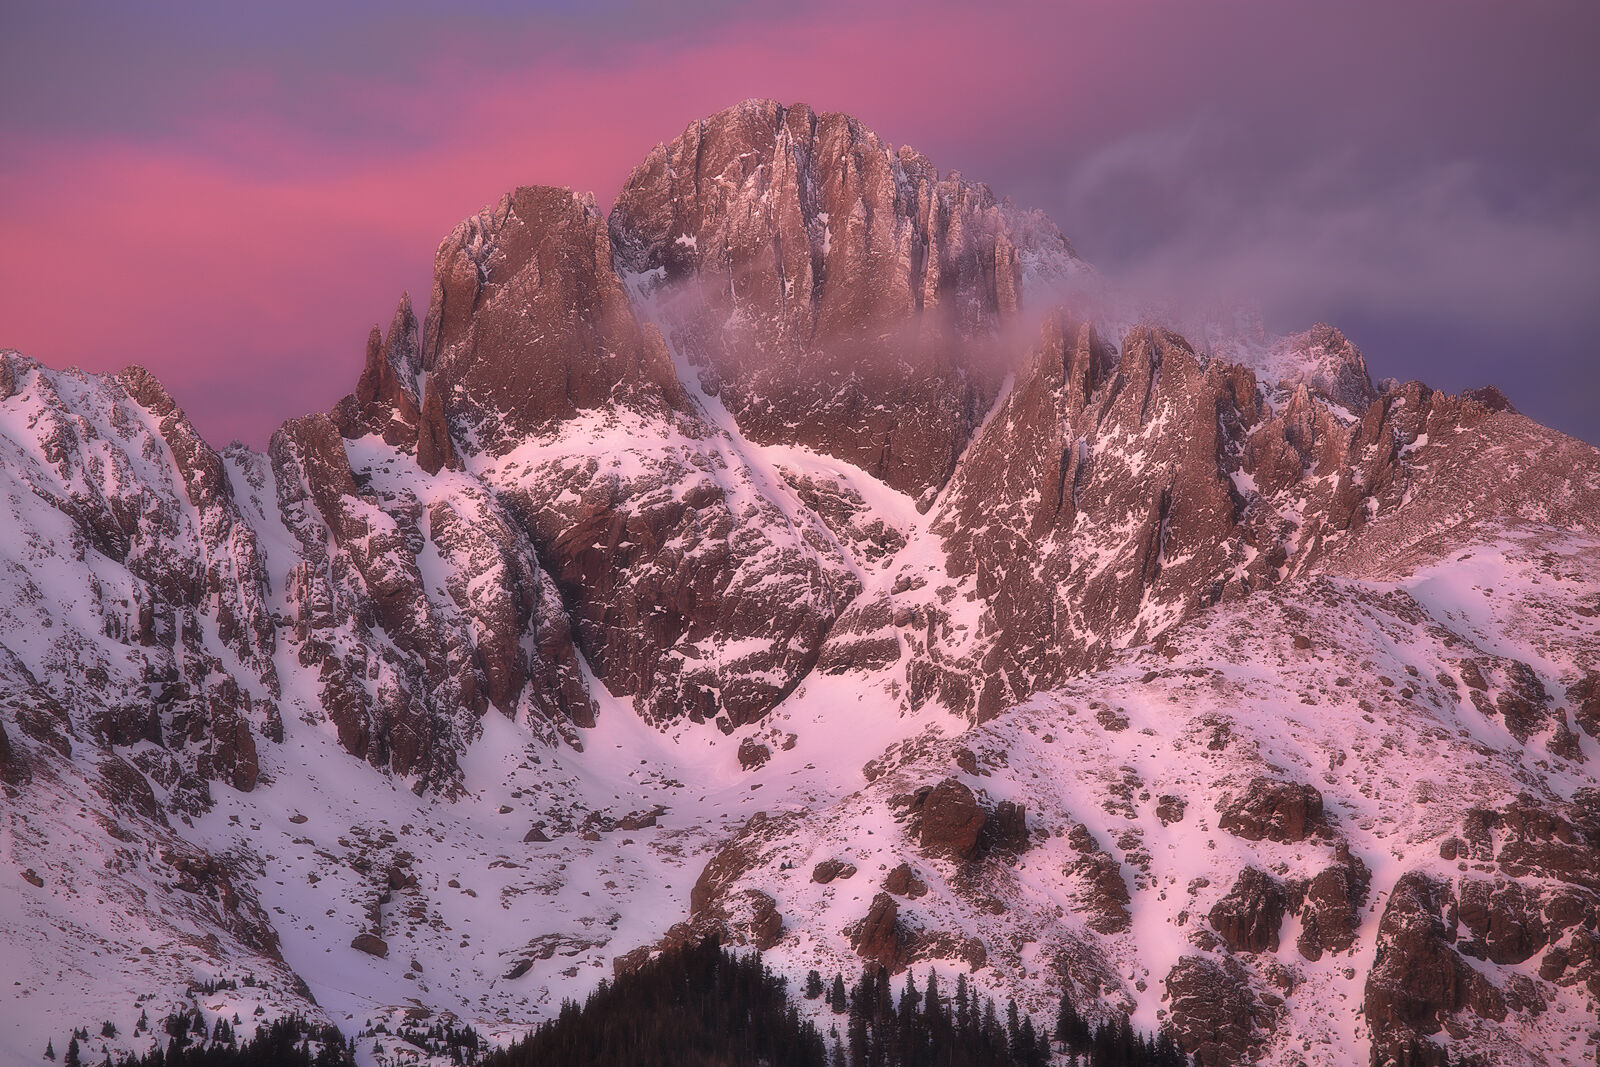 The top of Crestone Peak is seen slightly shrouded in clouds with pink skies at sunrise. Snow on the mountains glows with the sun.